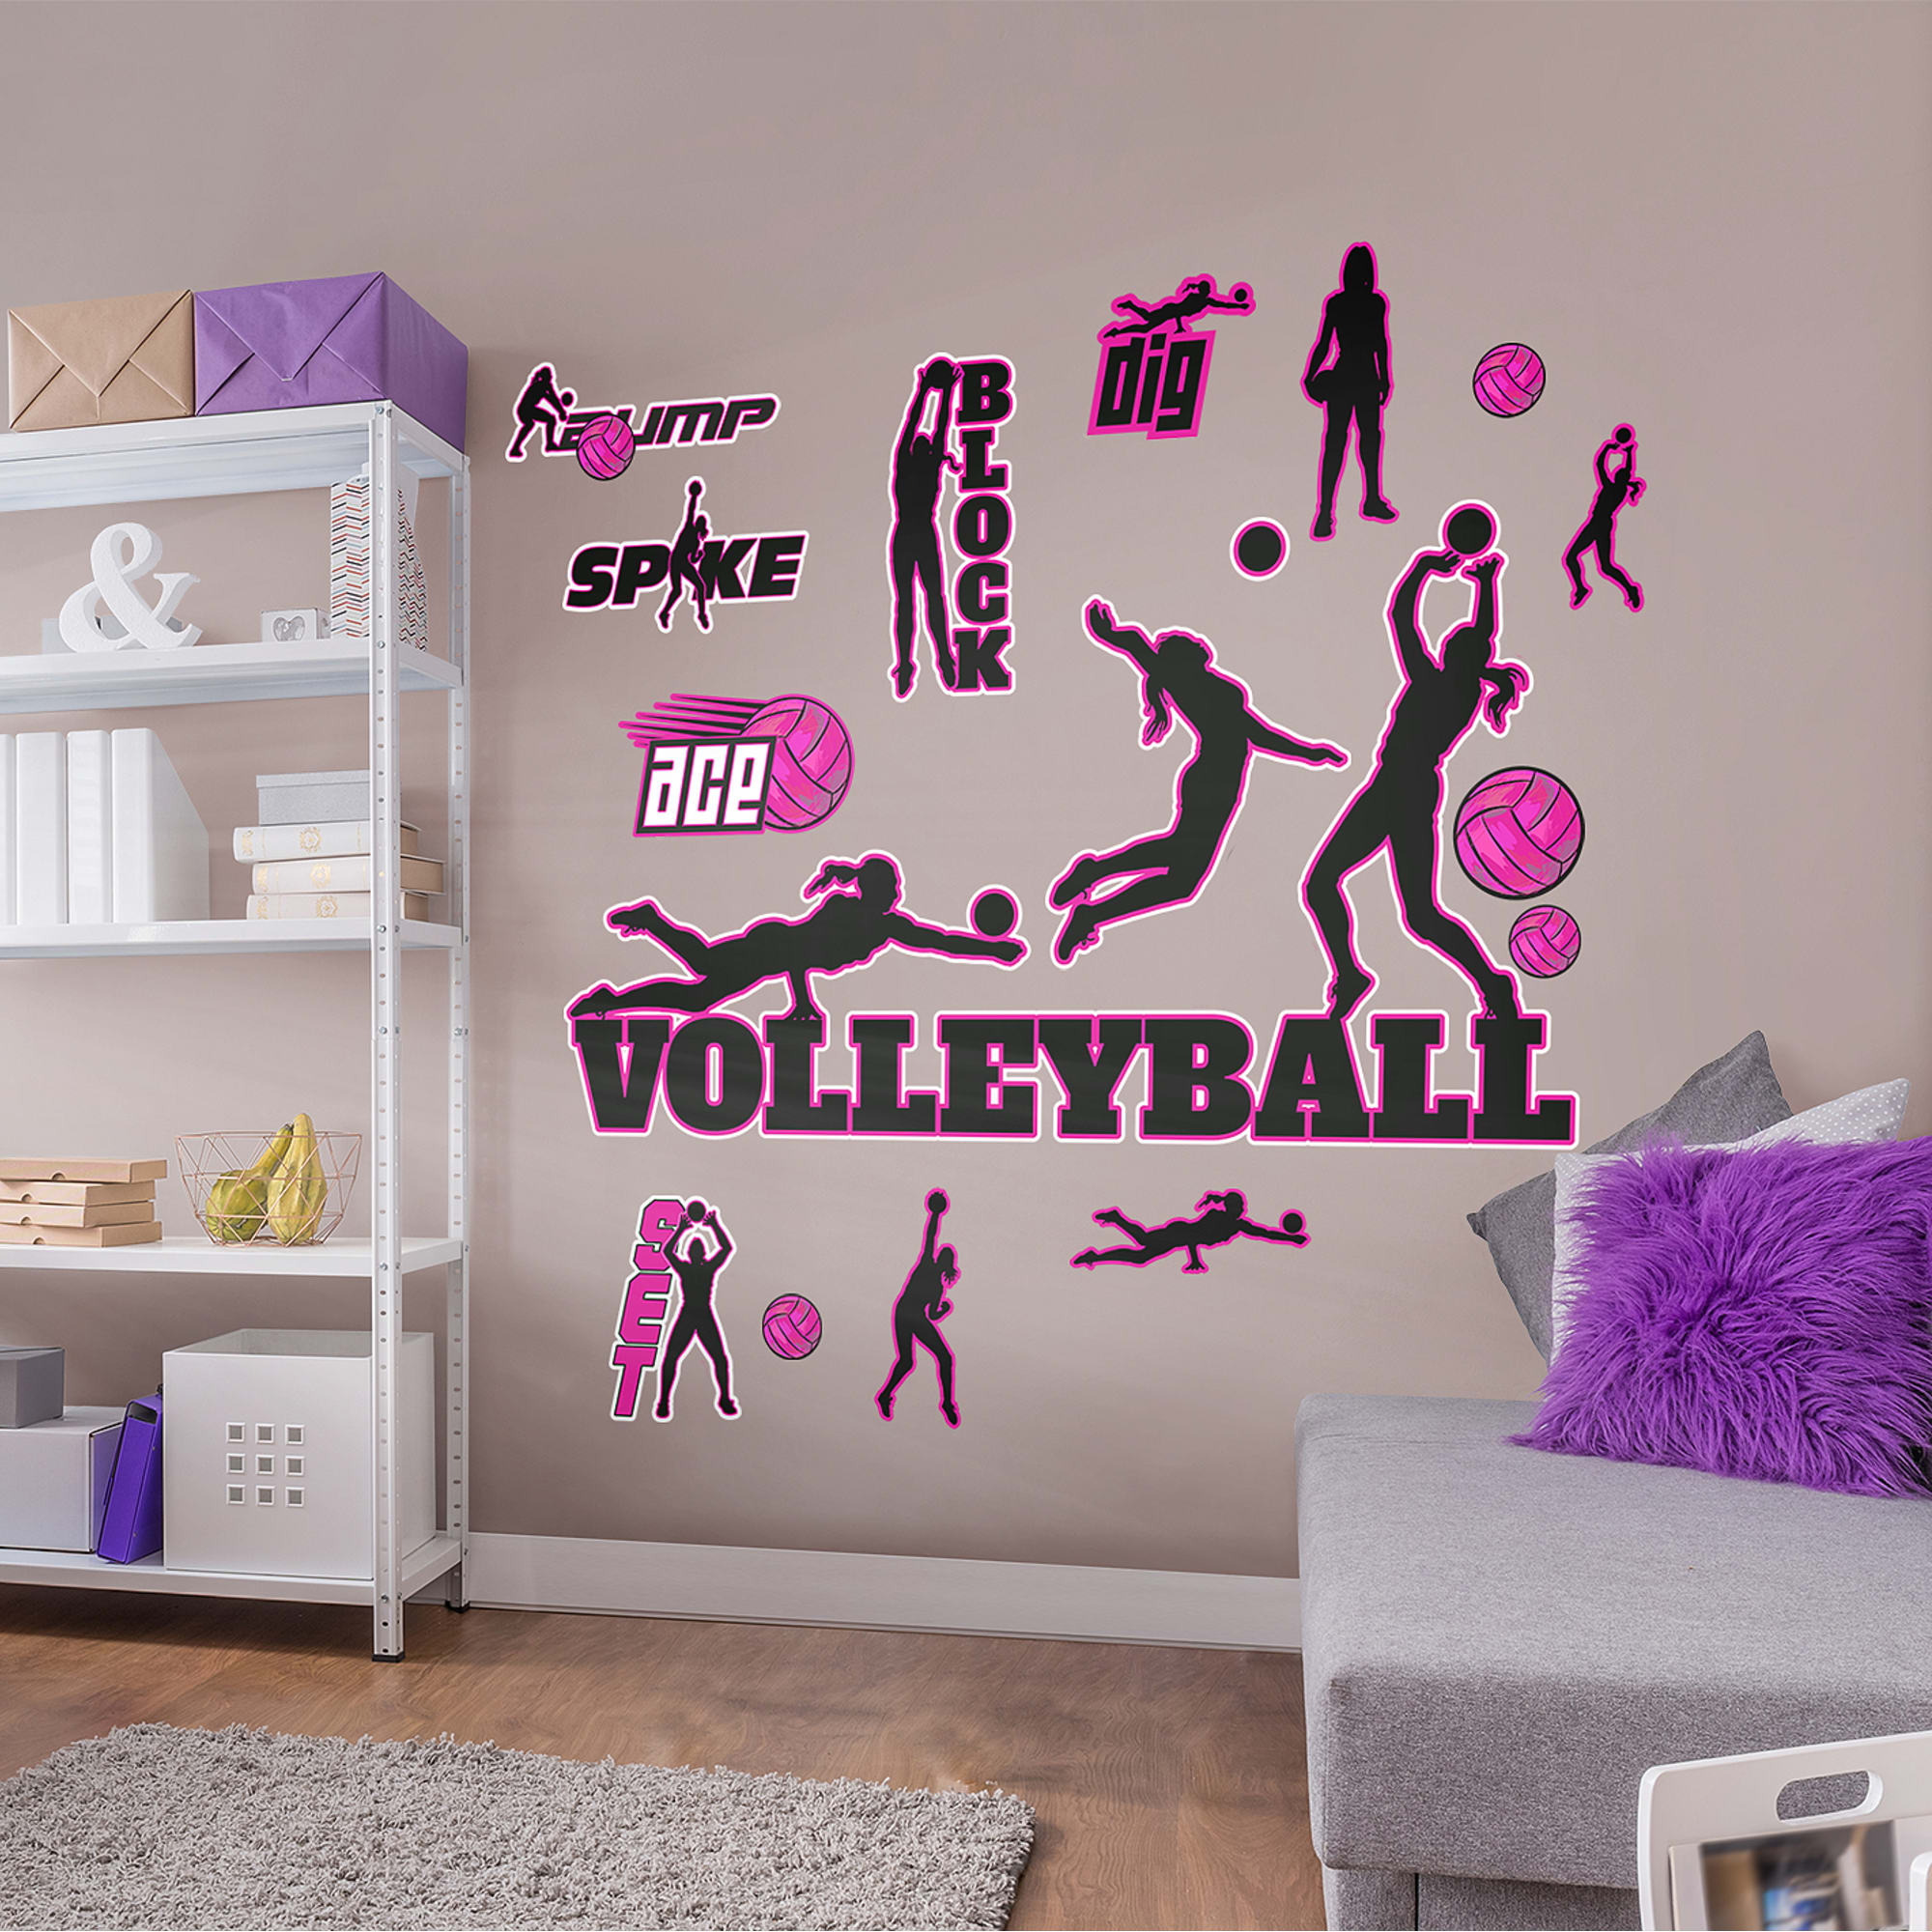 Volleyball: Collection - Removable Vinyl Decal 52.0"W x 79.0"H by Fathead